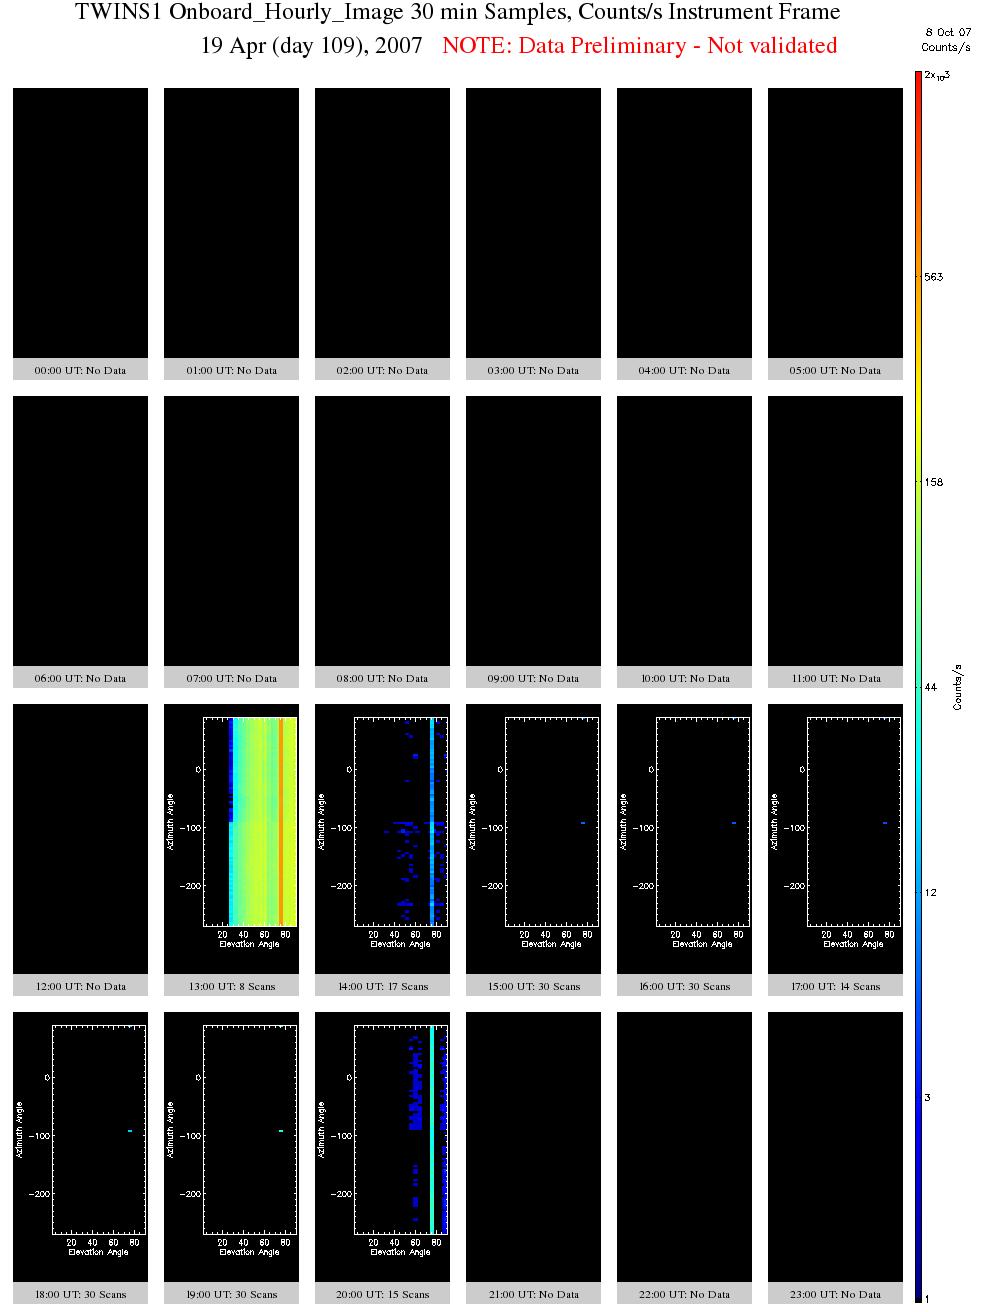 2.21 Onboard Hourly all Energy Instr Coord Count These plots show 30-minute averaged TWINS images calculated onboard the spacecraft using the onboard Look-Up Tables (LUTs) internal to the TWINS